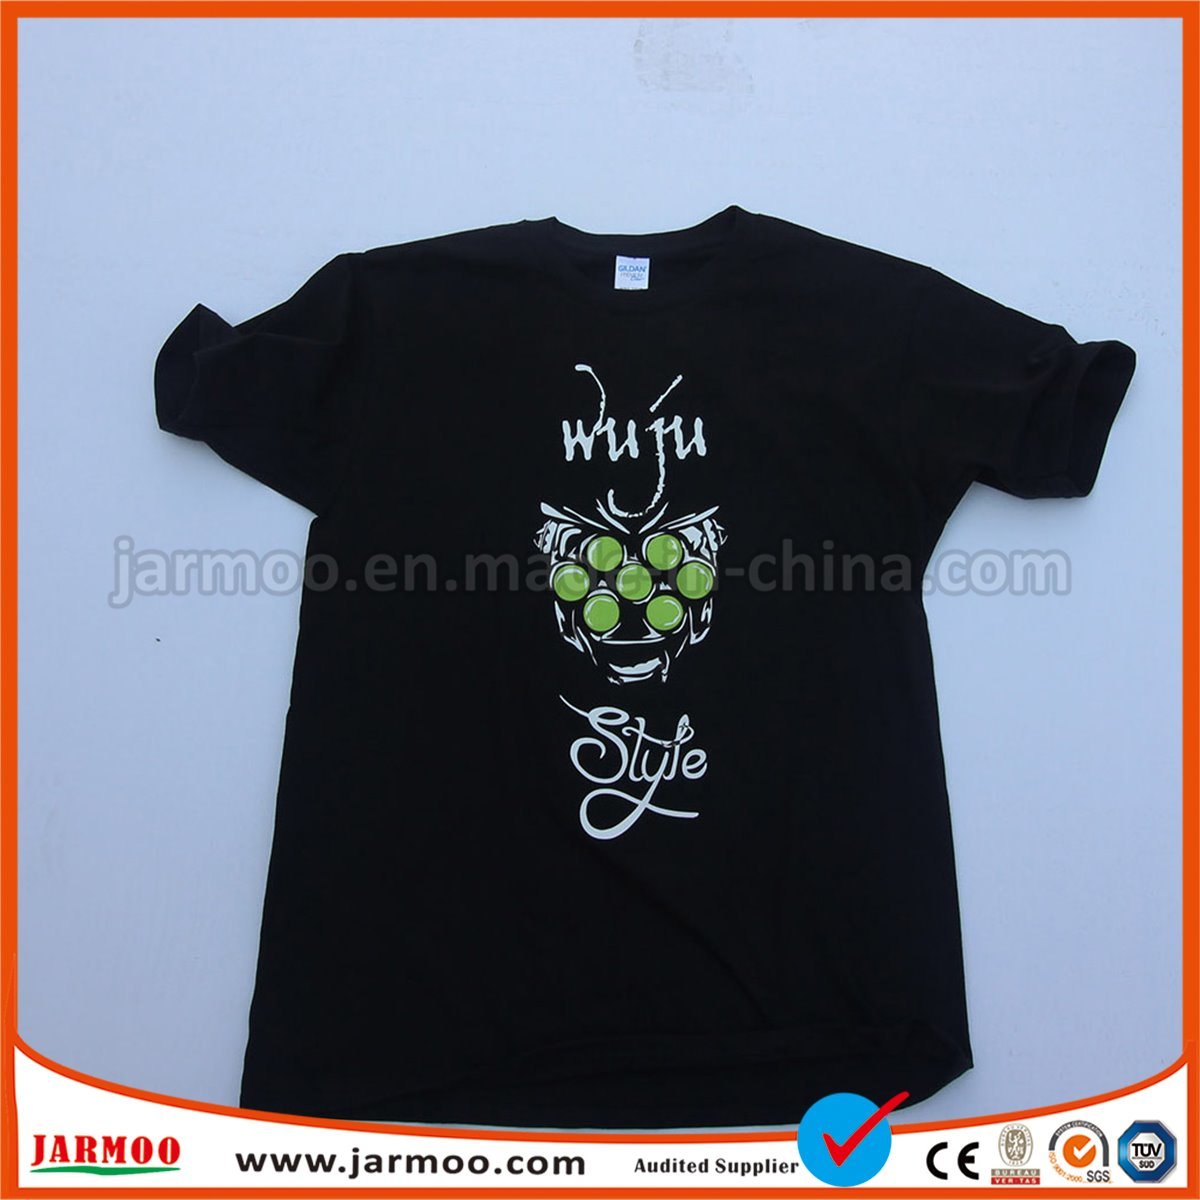 Promotional 65 Polyester 35 Cotton T Shirt